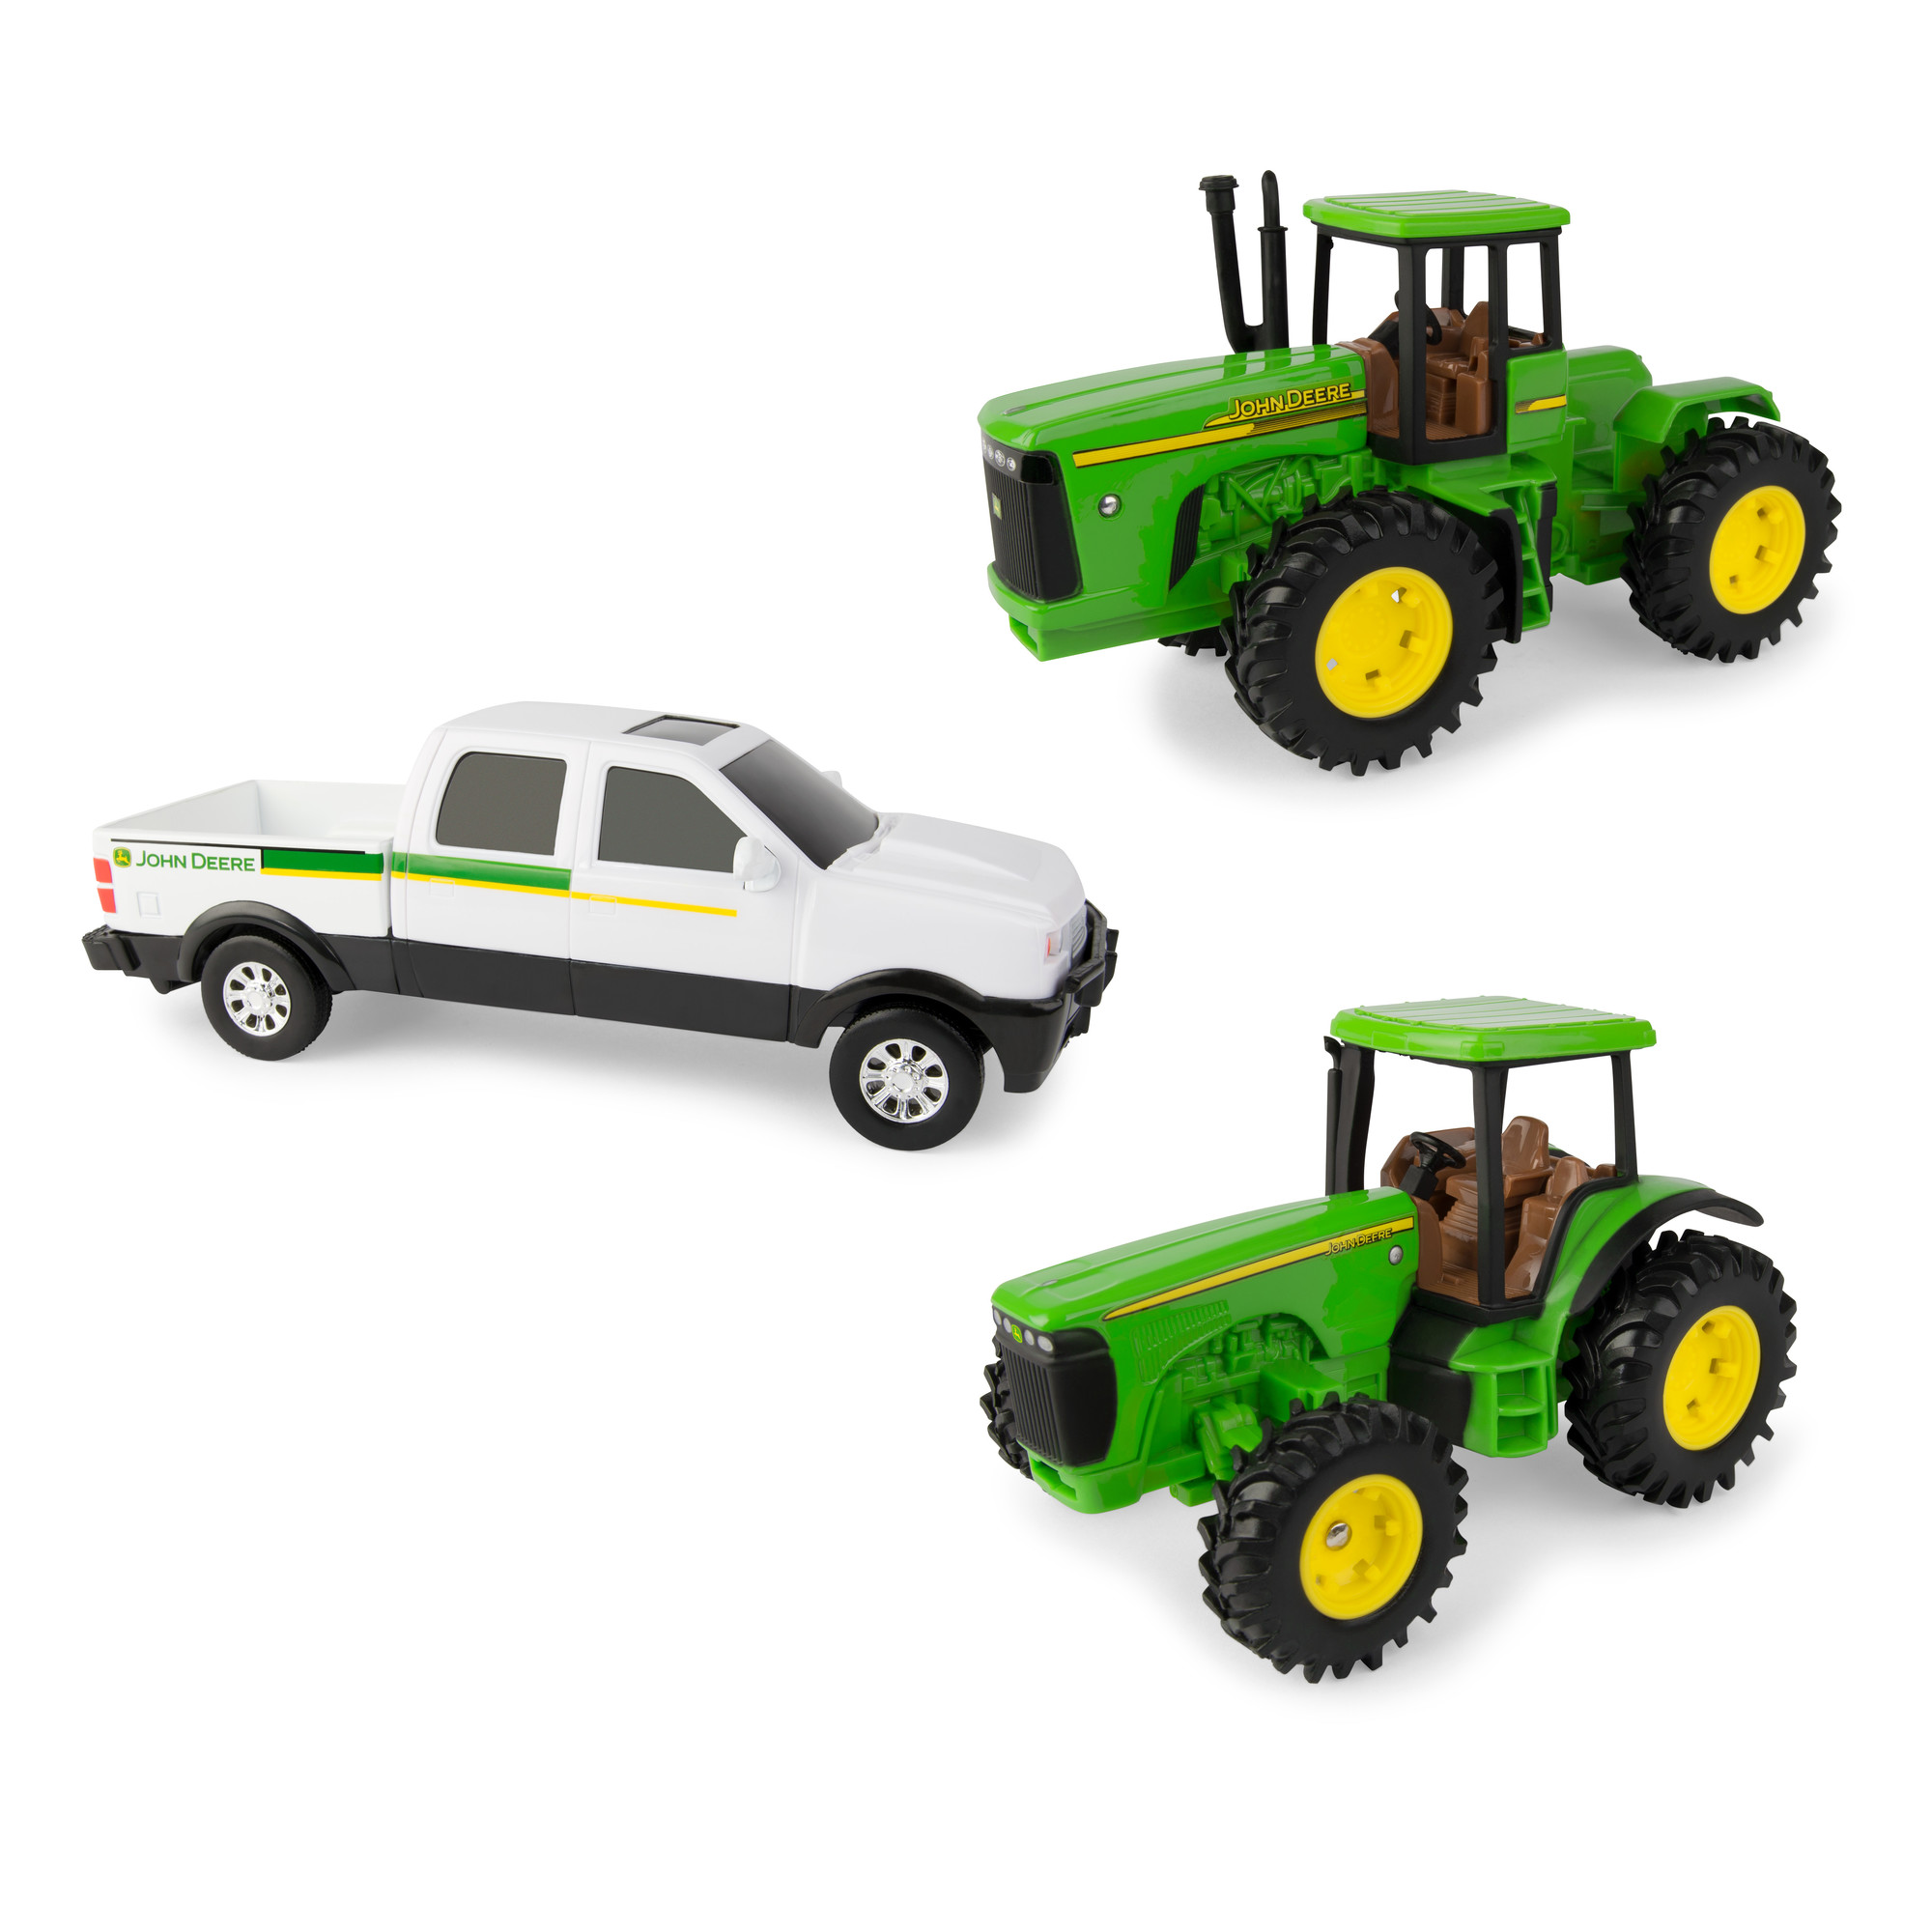 John Deere Vehicle Value Gift Set - Toy Pickup Truck And Two Toy Tractors, 3 Pack - image 1 of 3